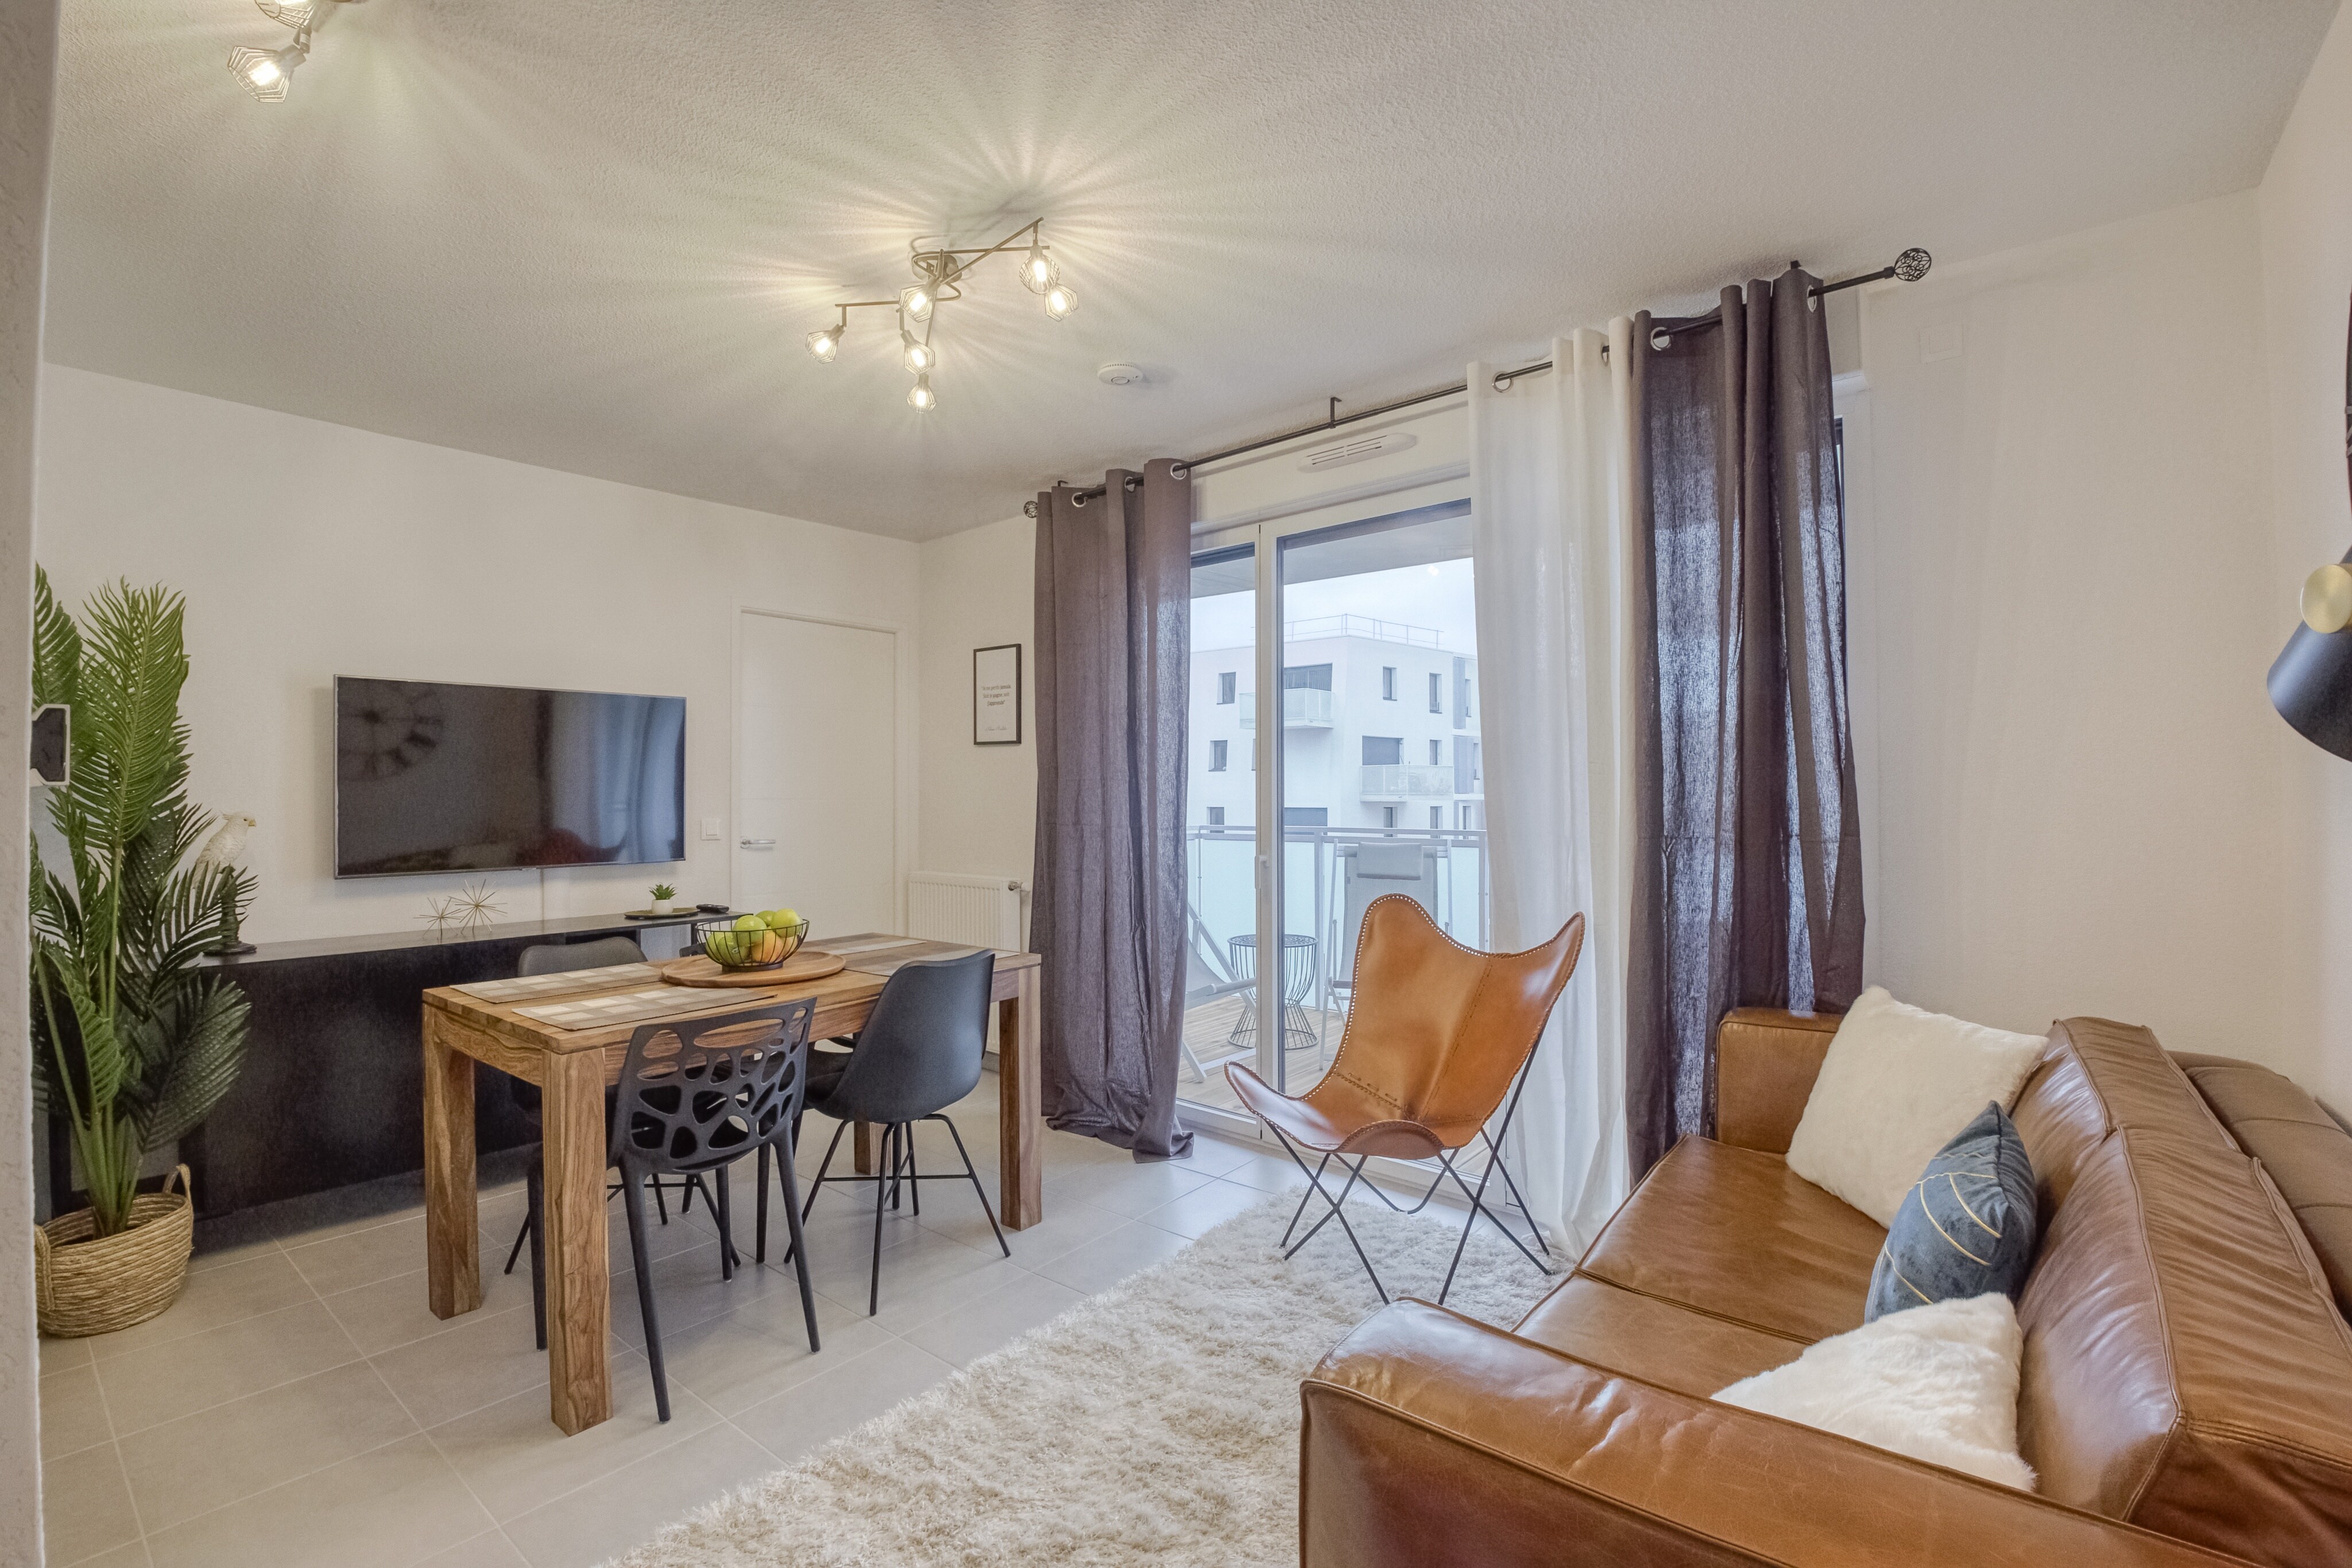 Property Image 2 - Stylish one bedroom flat with balcony in Toulouse